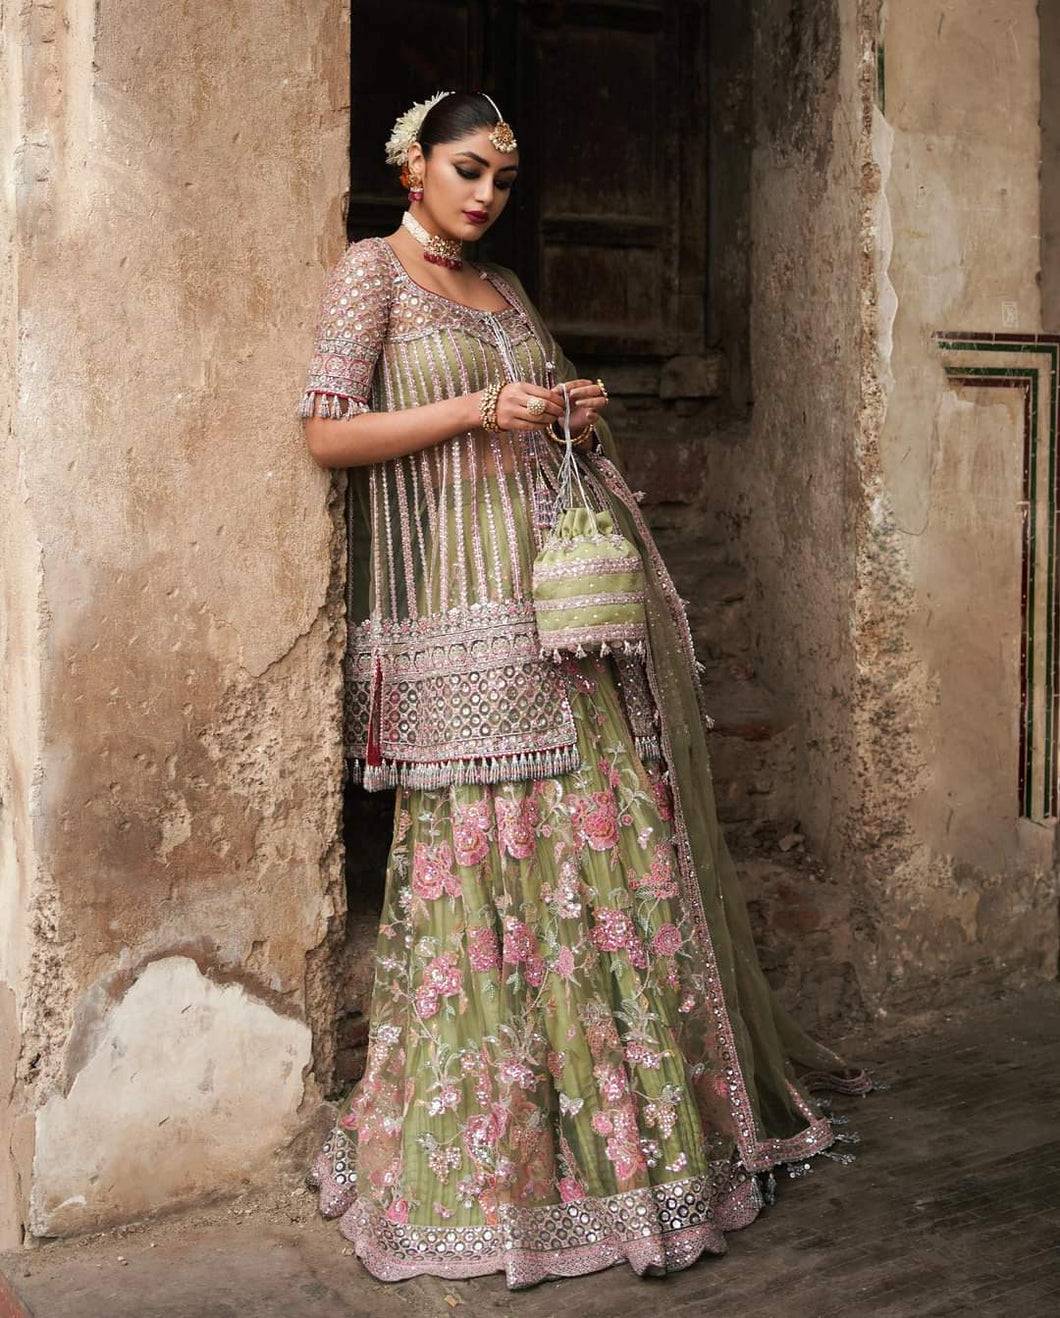 HUSSAIN REHAR | WEDDING FESTIVE COLLECTION 2023 | SAFAR LEBAASONLINE Available on our website. We have exclusive variety of PAKISTANI DRESSES ONLINE. This wedding season get your unstitched or customized dresses from our PAKISTANI BOUTIQUE ONLINE. PAKISTANI DRESSES IN UK, USA,  Lebaasonline at SALE price!